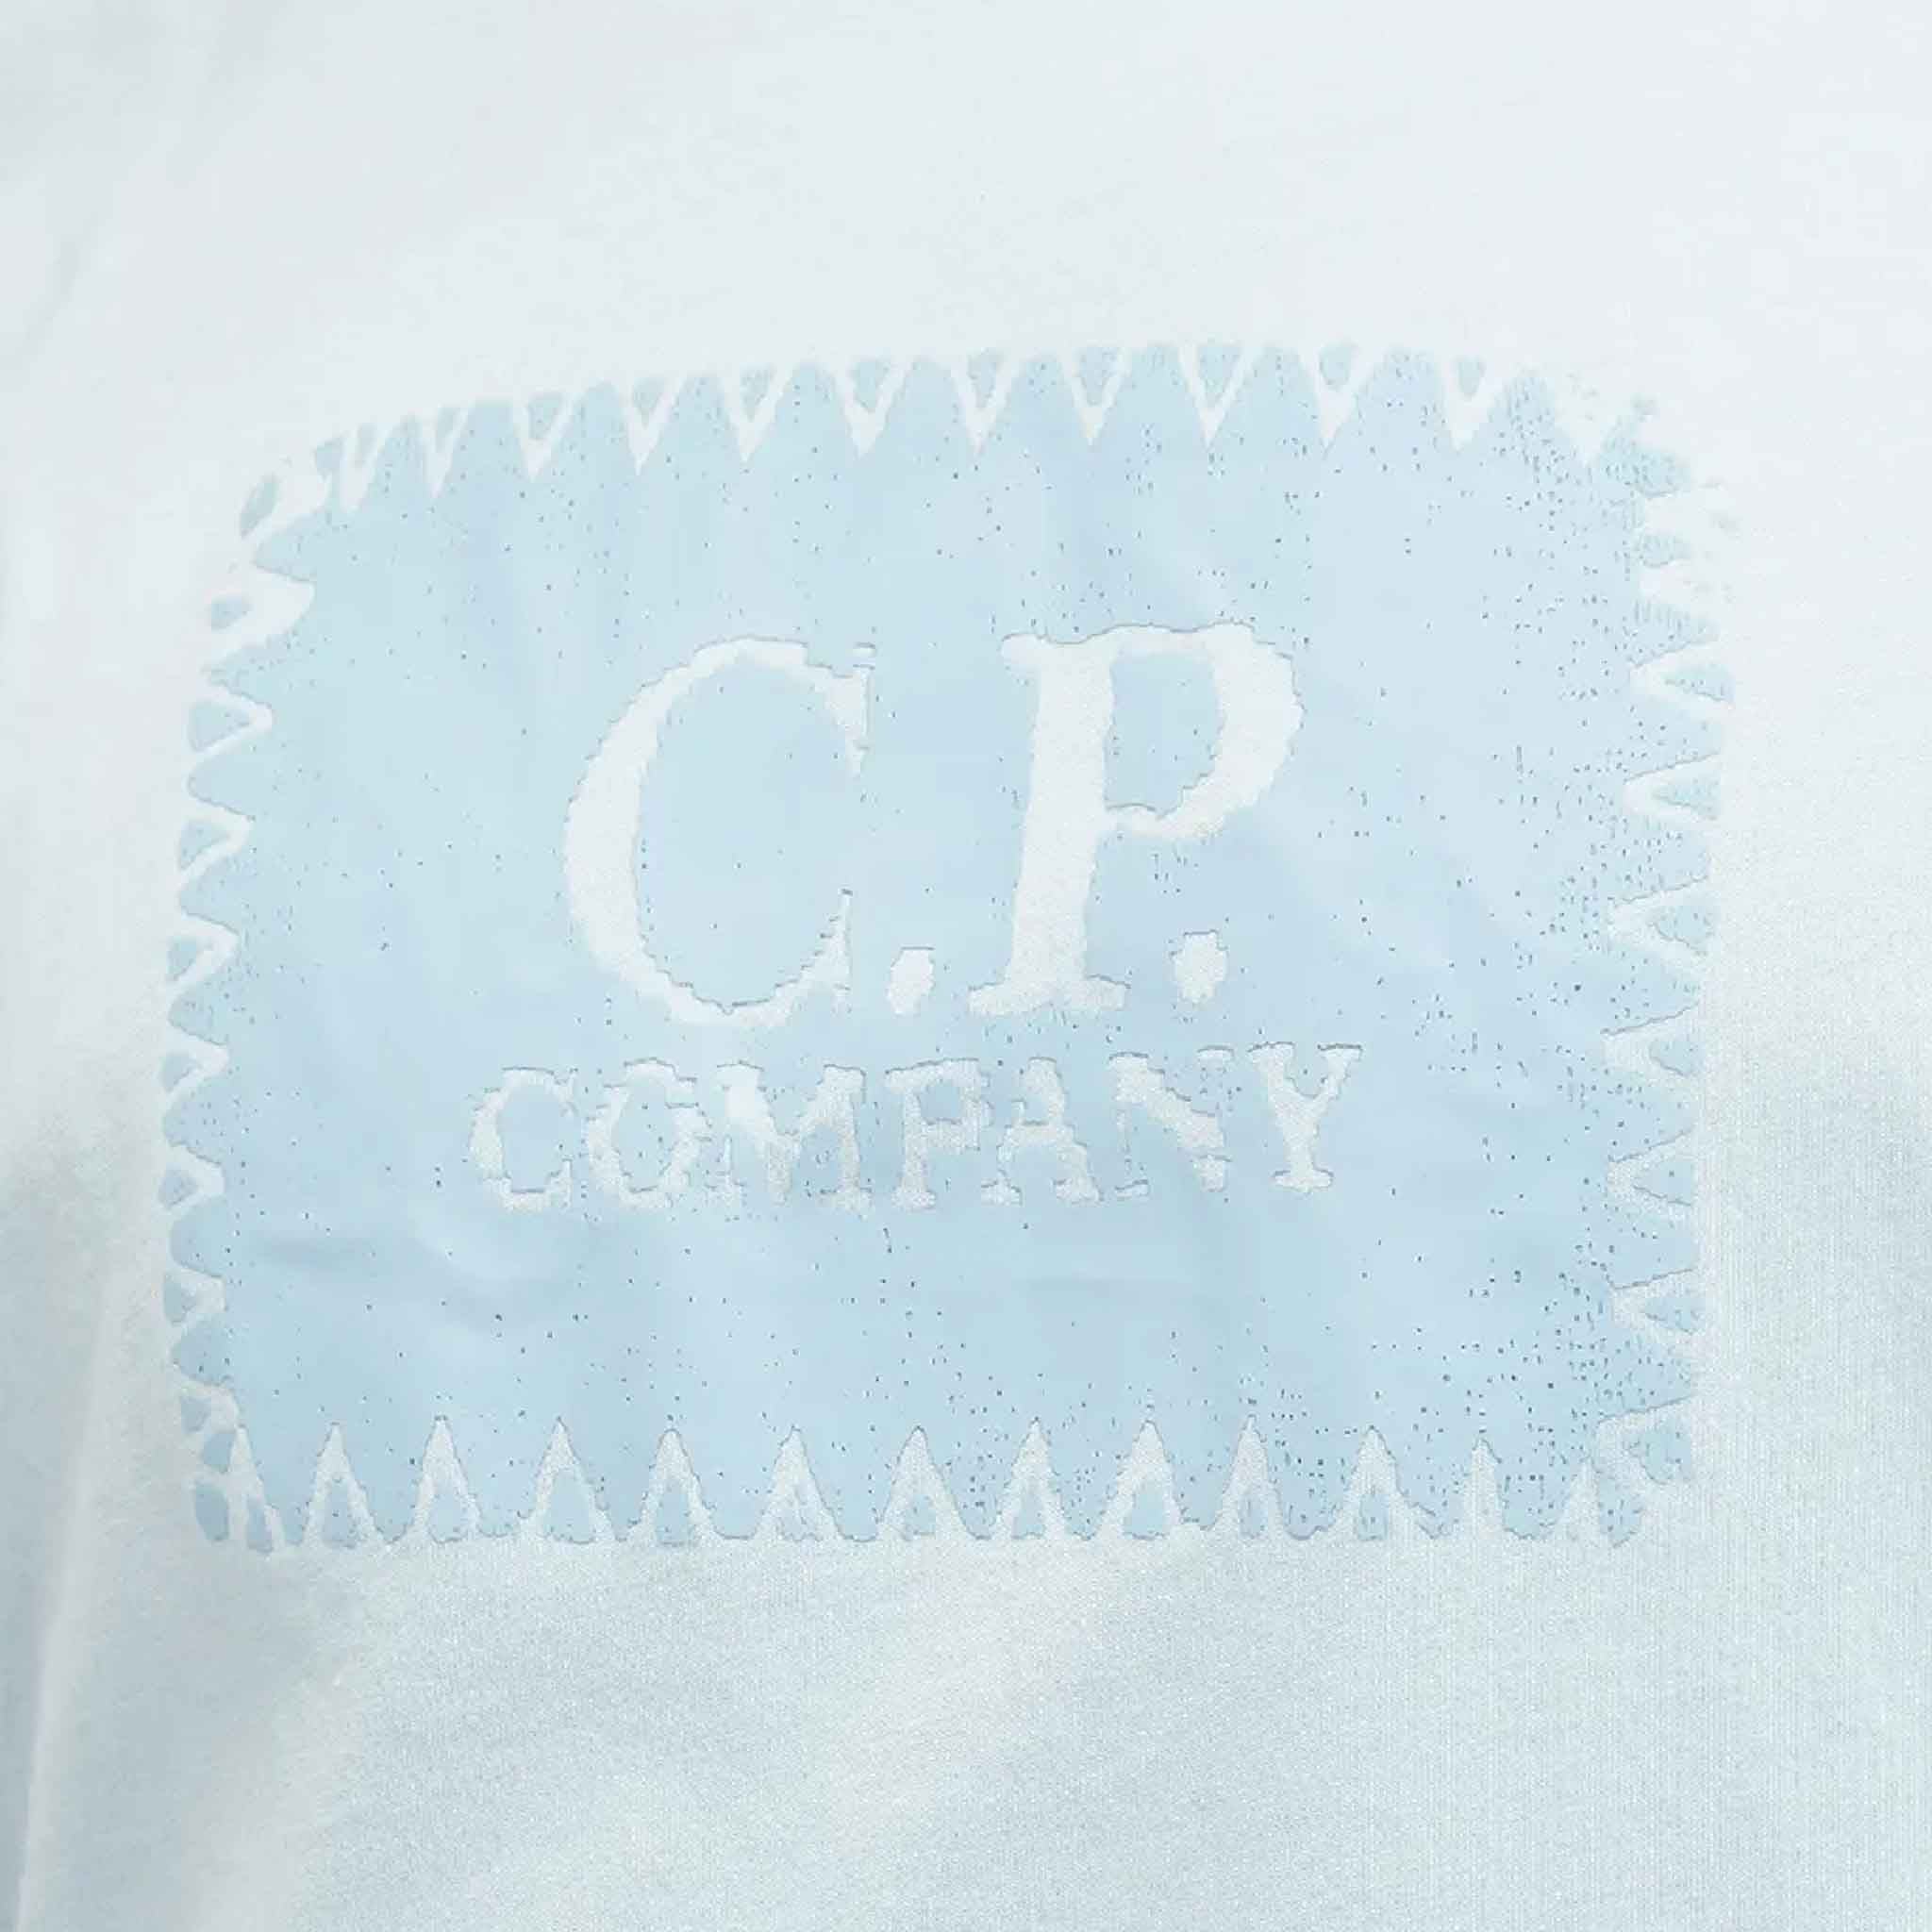 C.P. Company 30/1 Jersey Label T-shirt in Starlight Blue